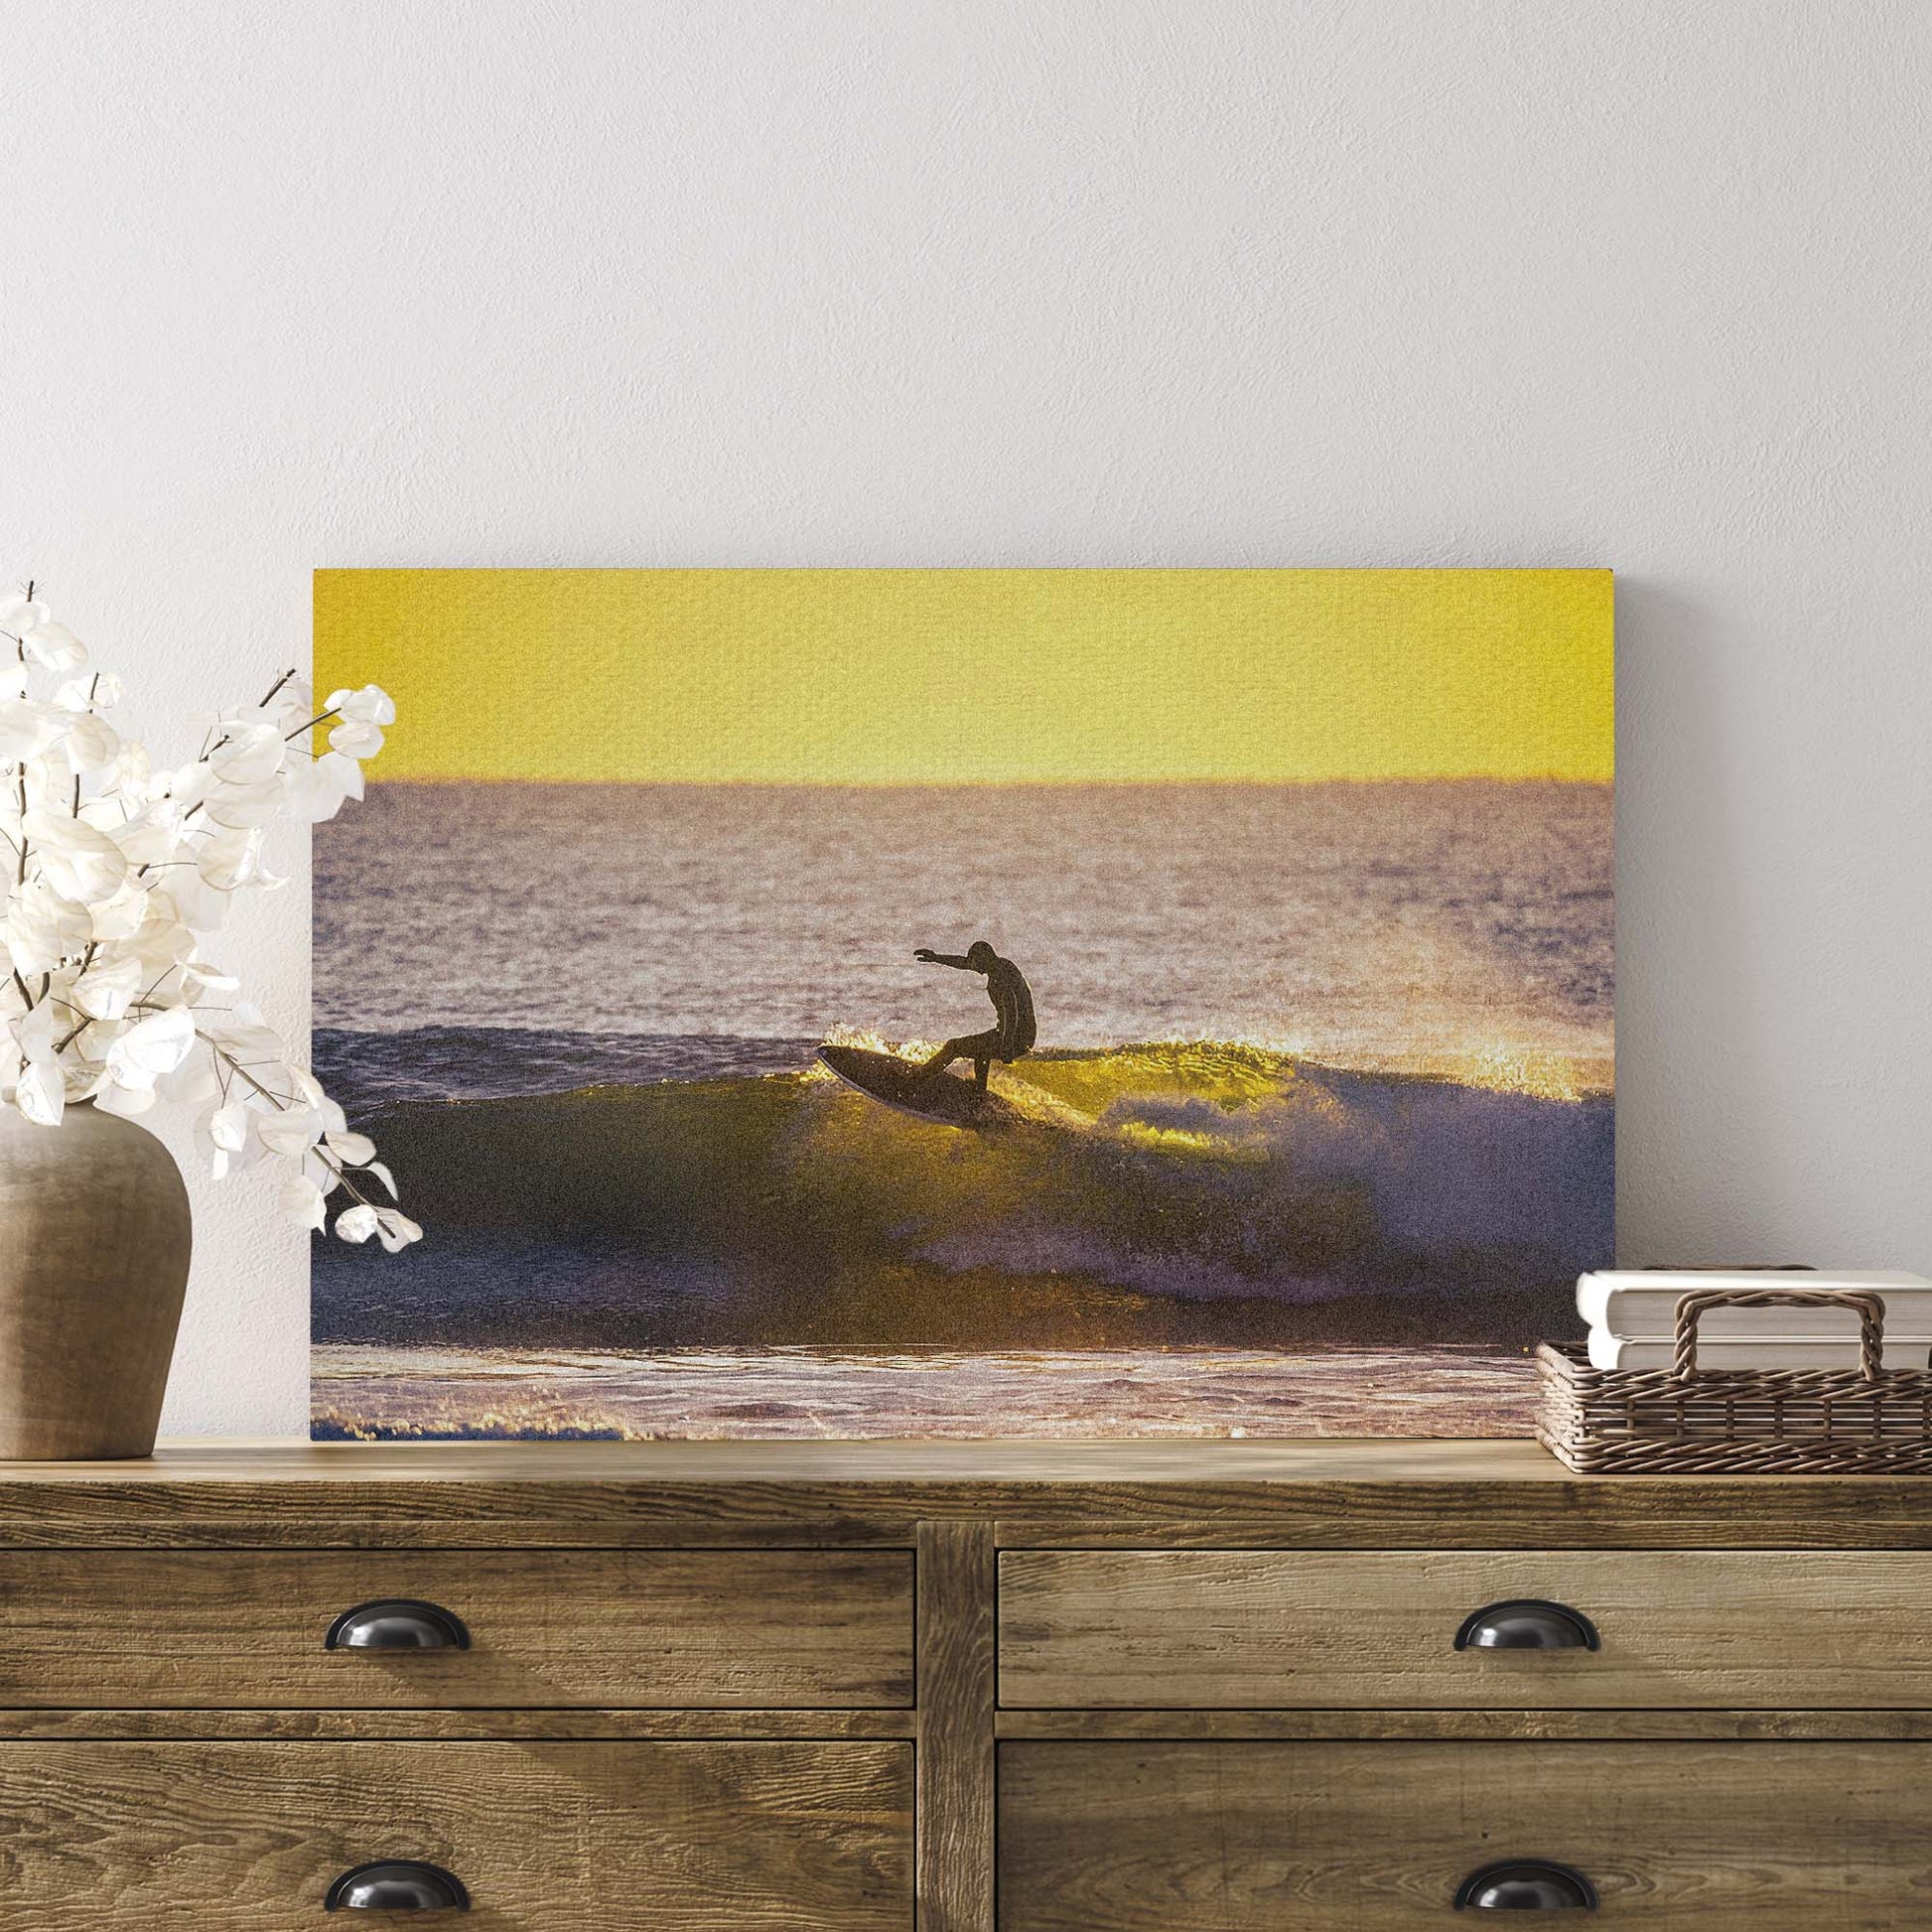 Surfing Silhouette Canvas Wall Art - Image by Tailored Canvases